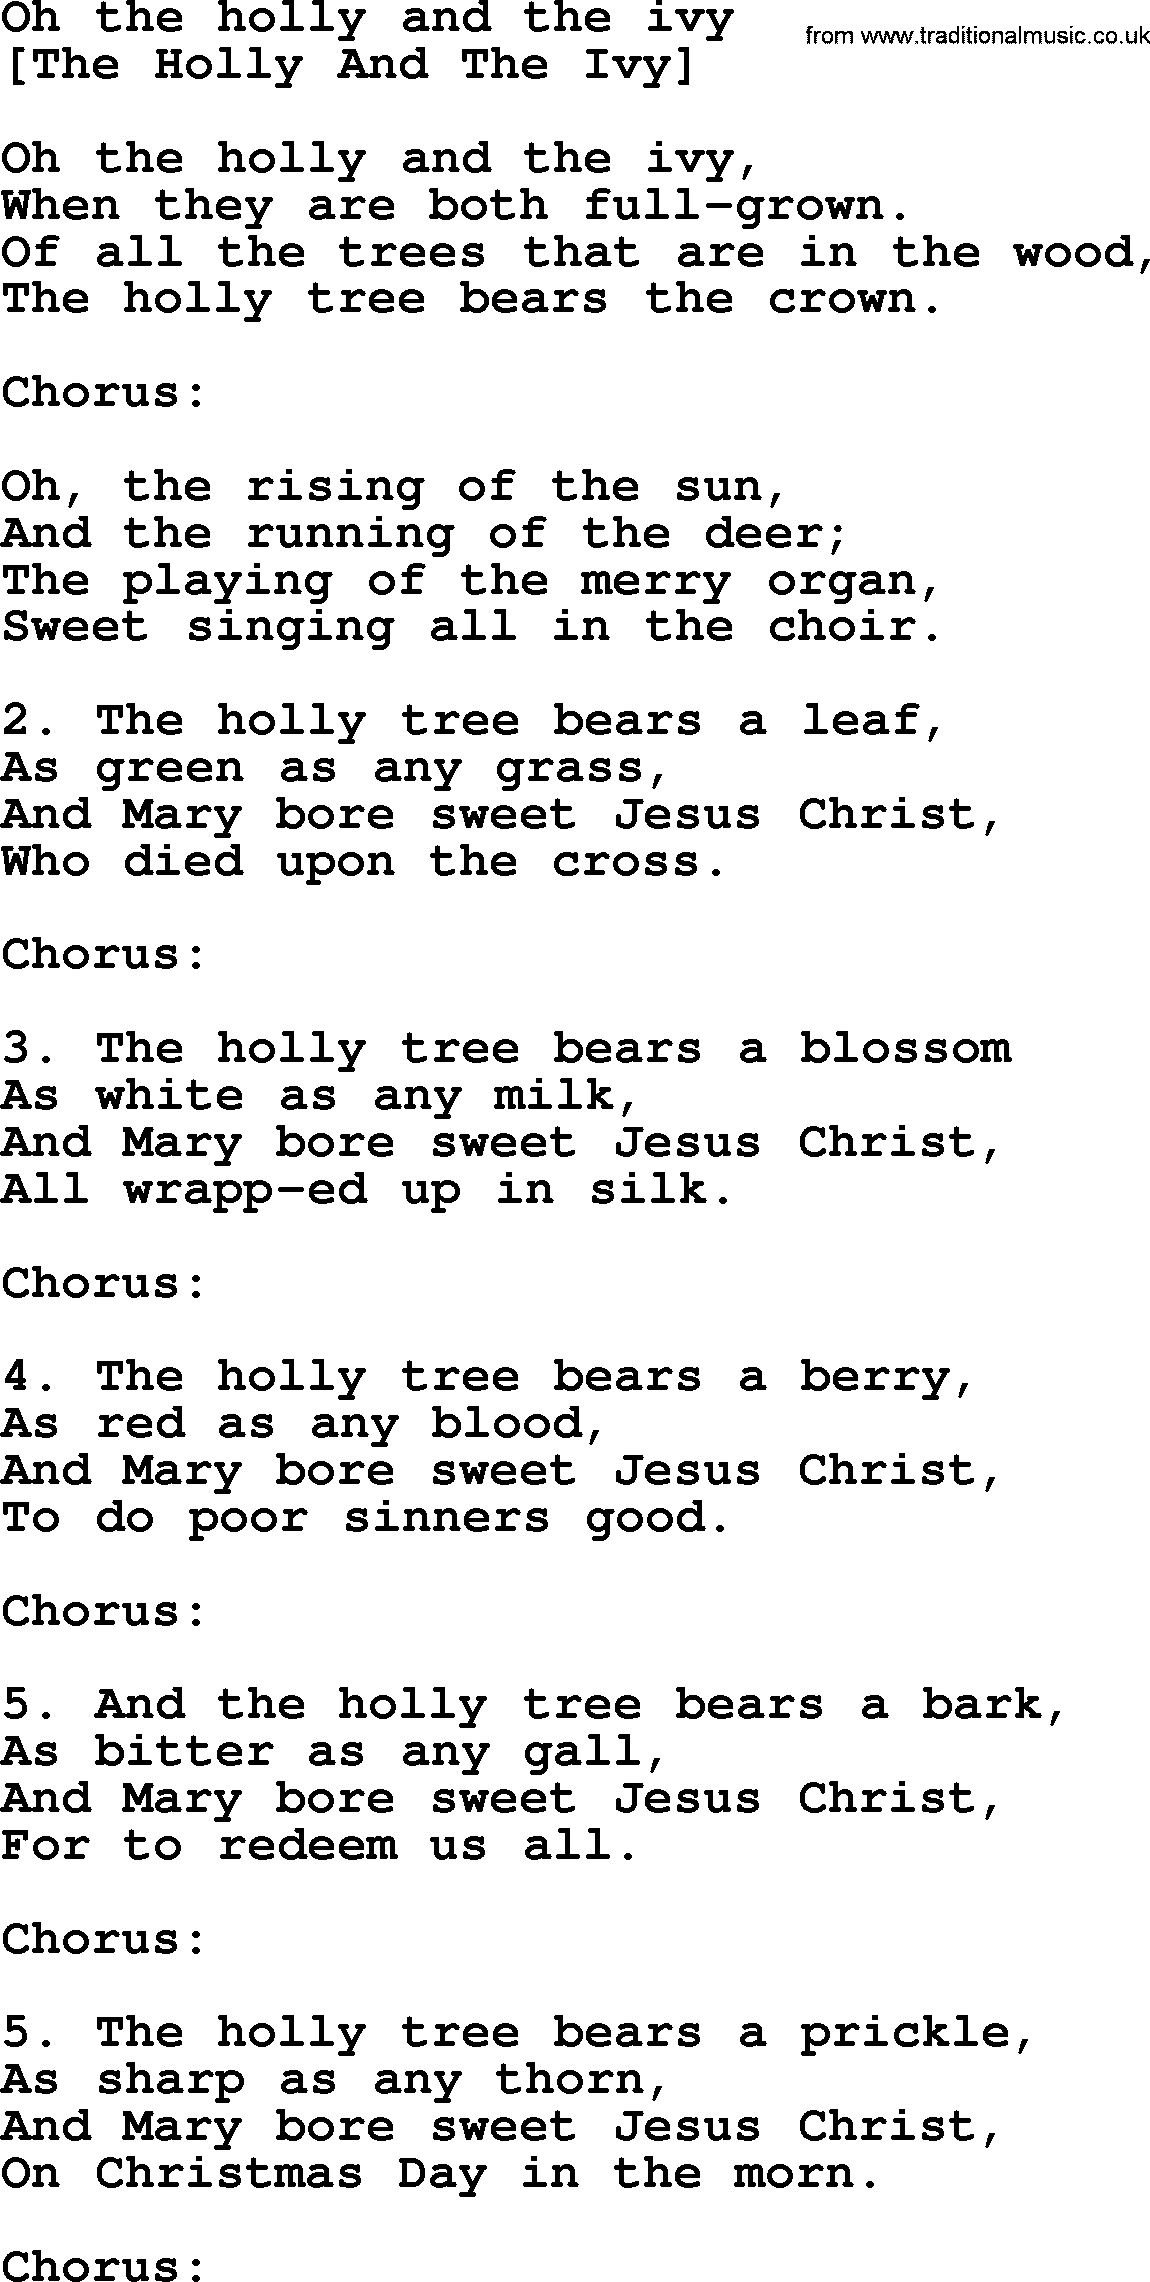 Old English Song: Oh The Holly And The Ivy lyrics